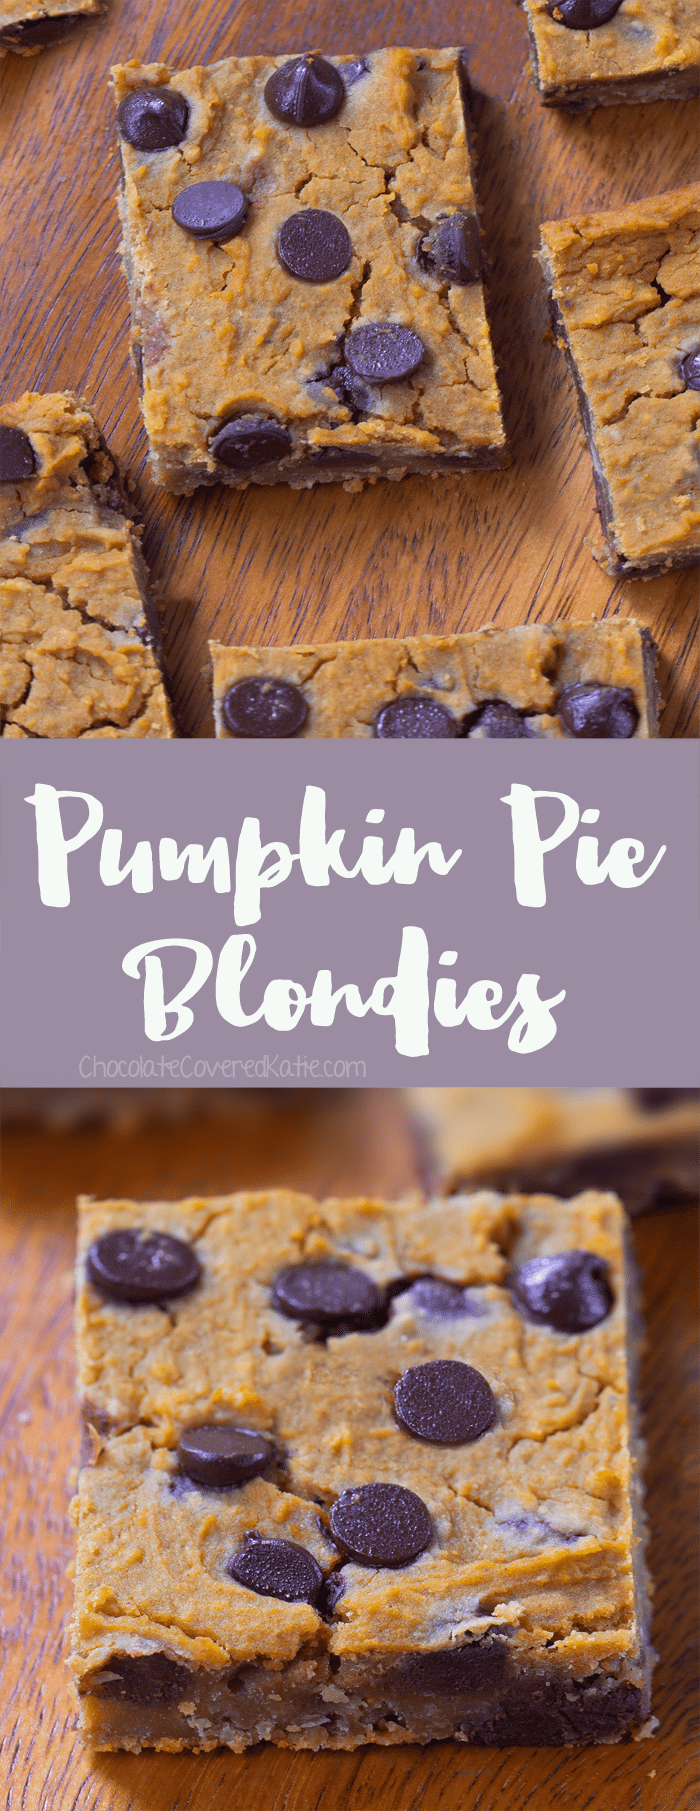 Pumpkin Blondies - from @choccoveredkt... Ingredients: 1 cup canned pumpkin, 1/4 cup rolled oats, 2 tsp vanilla, 1/2 tbsp... Full recipe: https://chocolatecoveredkatie.com/2016/09/12/pumpkin-blondies-chocolate-chip-vegan/ 